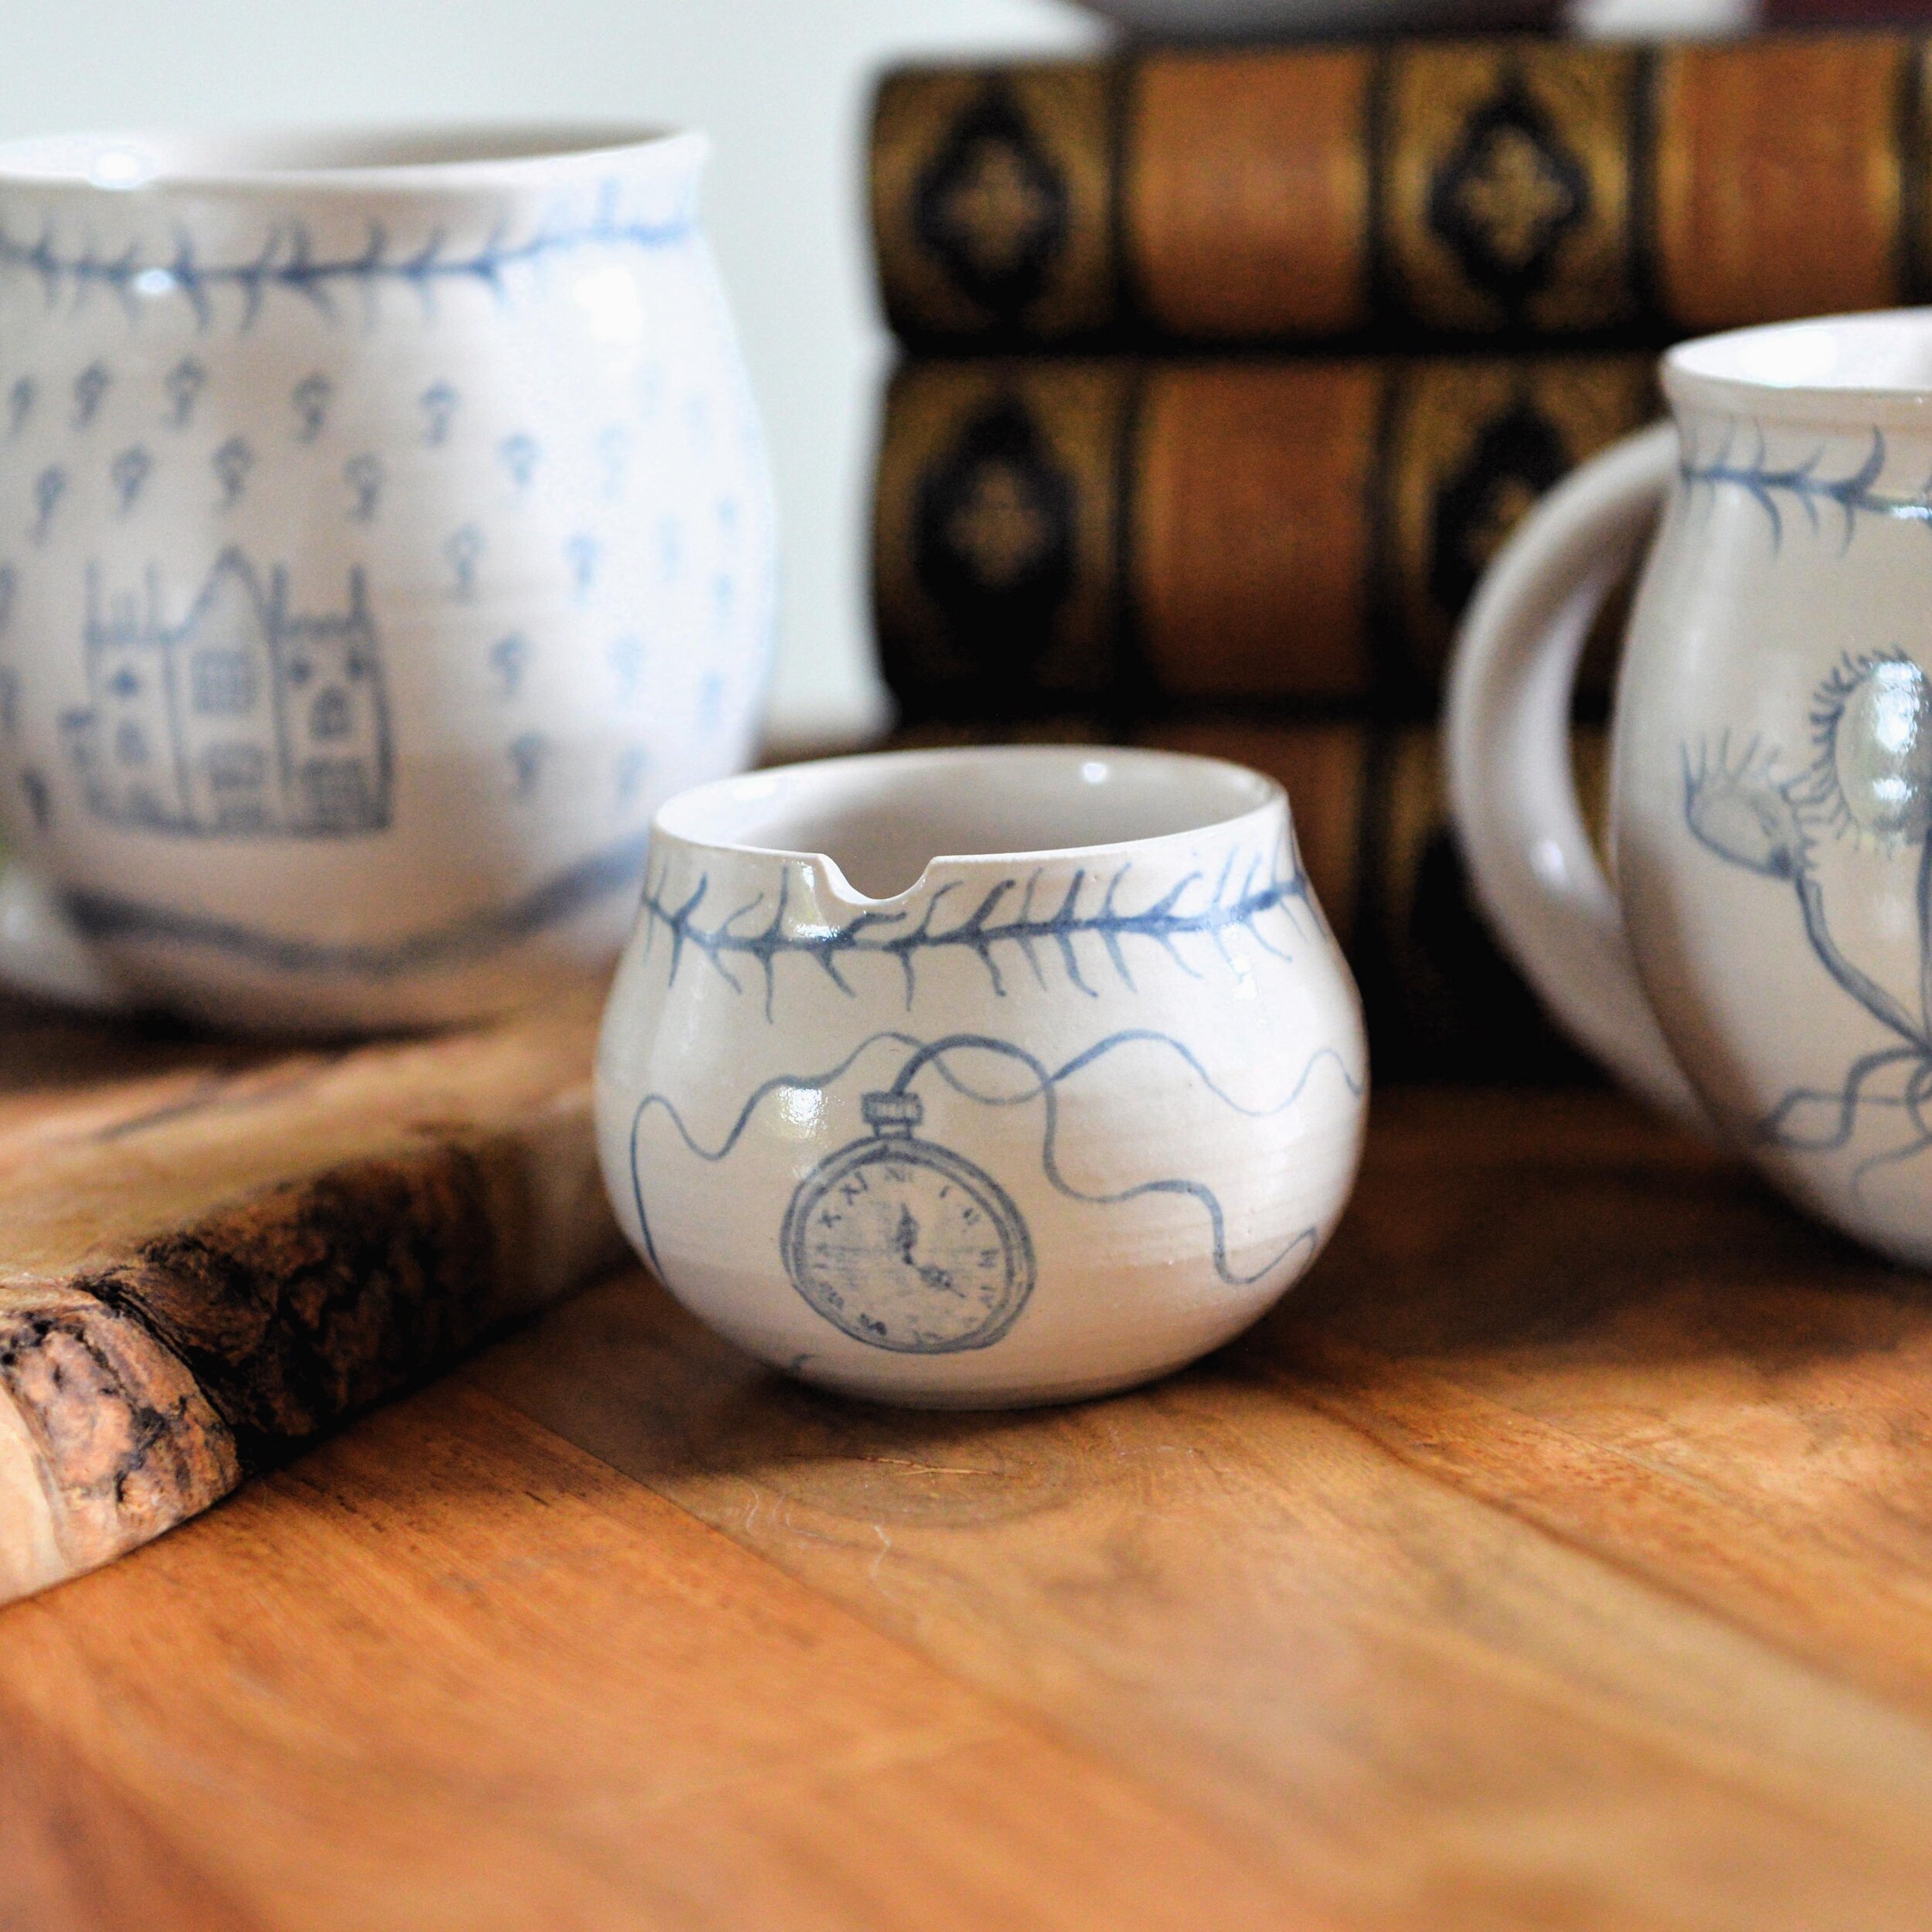 Here&rsquo;s a little peek at the teaset I made for The Burial Plot - I&rsquo;ll share more when I know the details of the competition and it&rsquo;s running ☺️ I&rsquo;ll be cursing the winner - it&rsquo;s the prettiest thing I&rsquo;ve made and it 